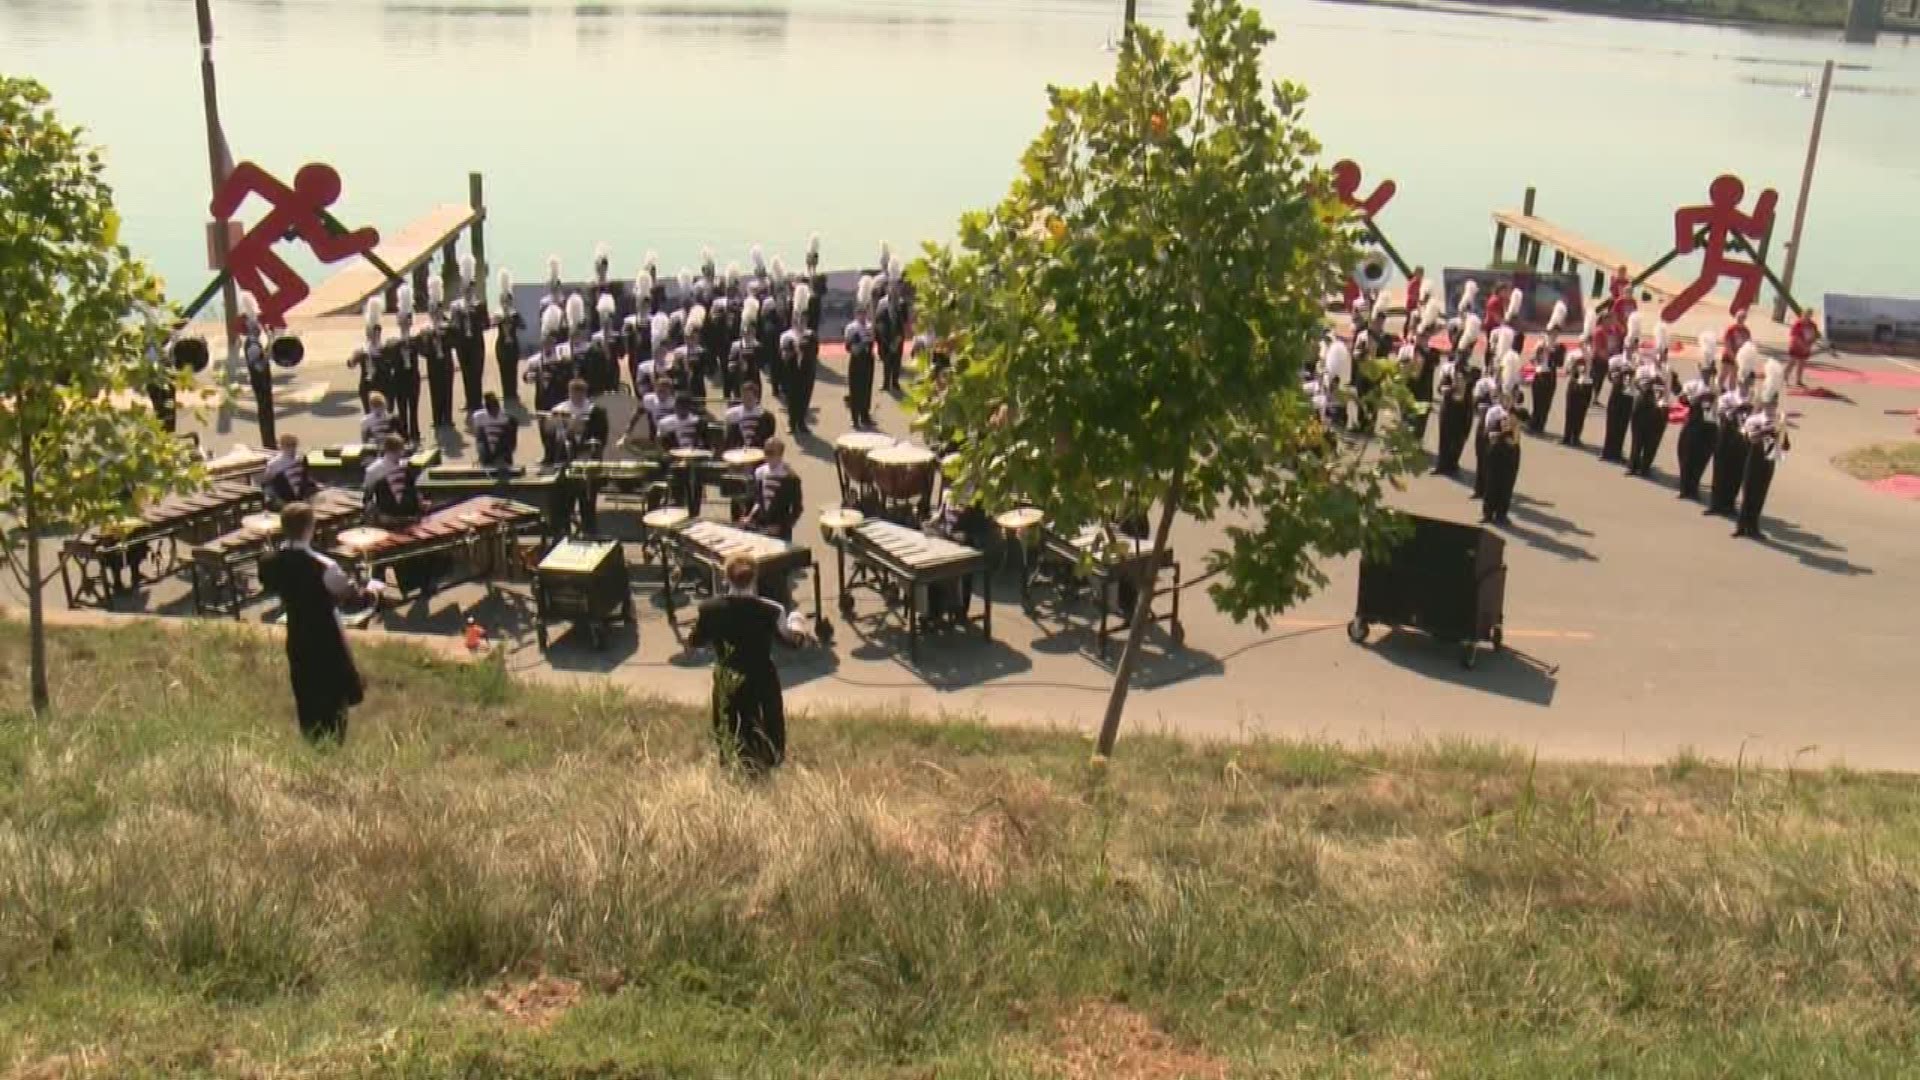 City celebrates marching band's 90th anniversary by commissioning composer to write hymn.